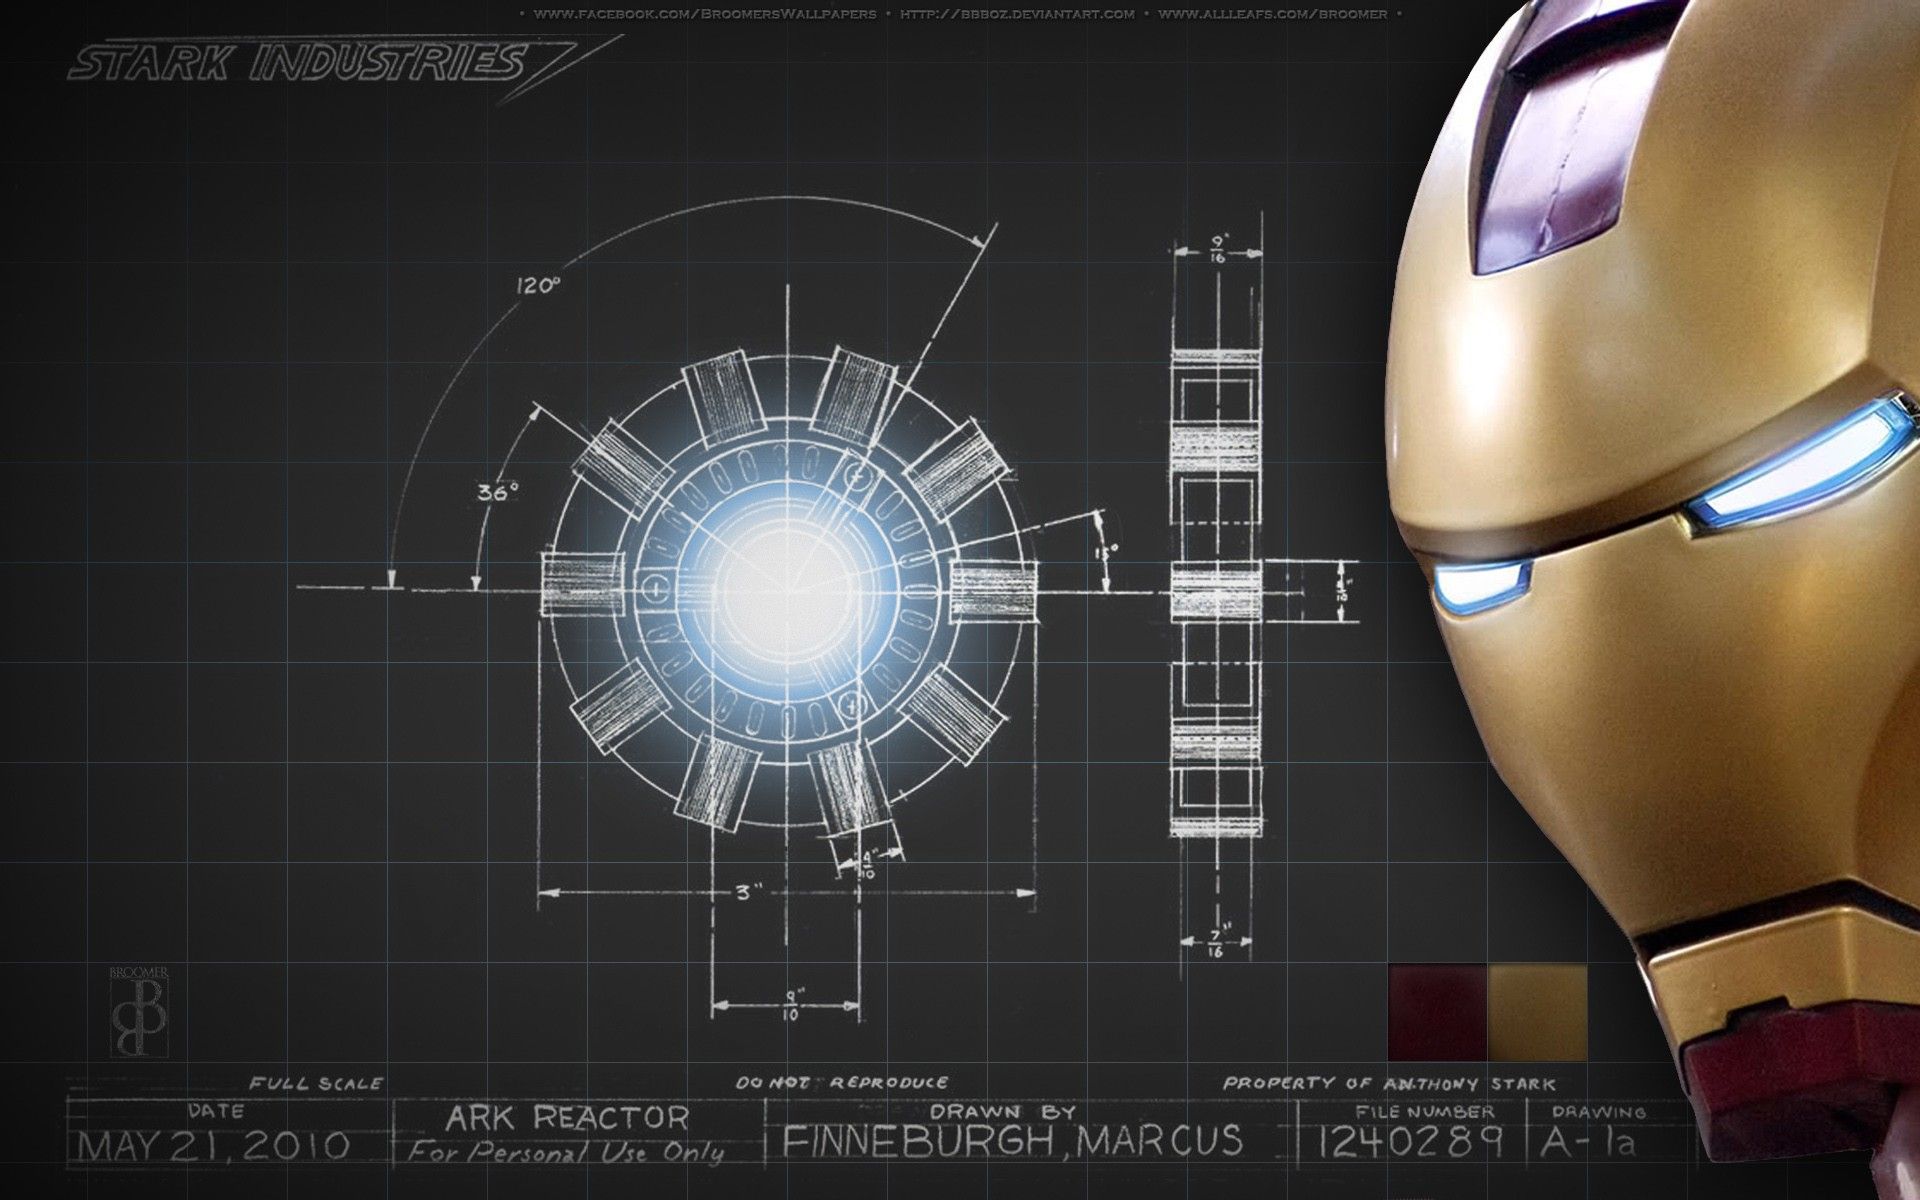 Picture Of Arc Reactor Iron Man 1 Desktop Wallpaper High Definition Monitor Download Free Amazing Background Photo Artwork 1920x1200